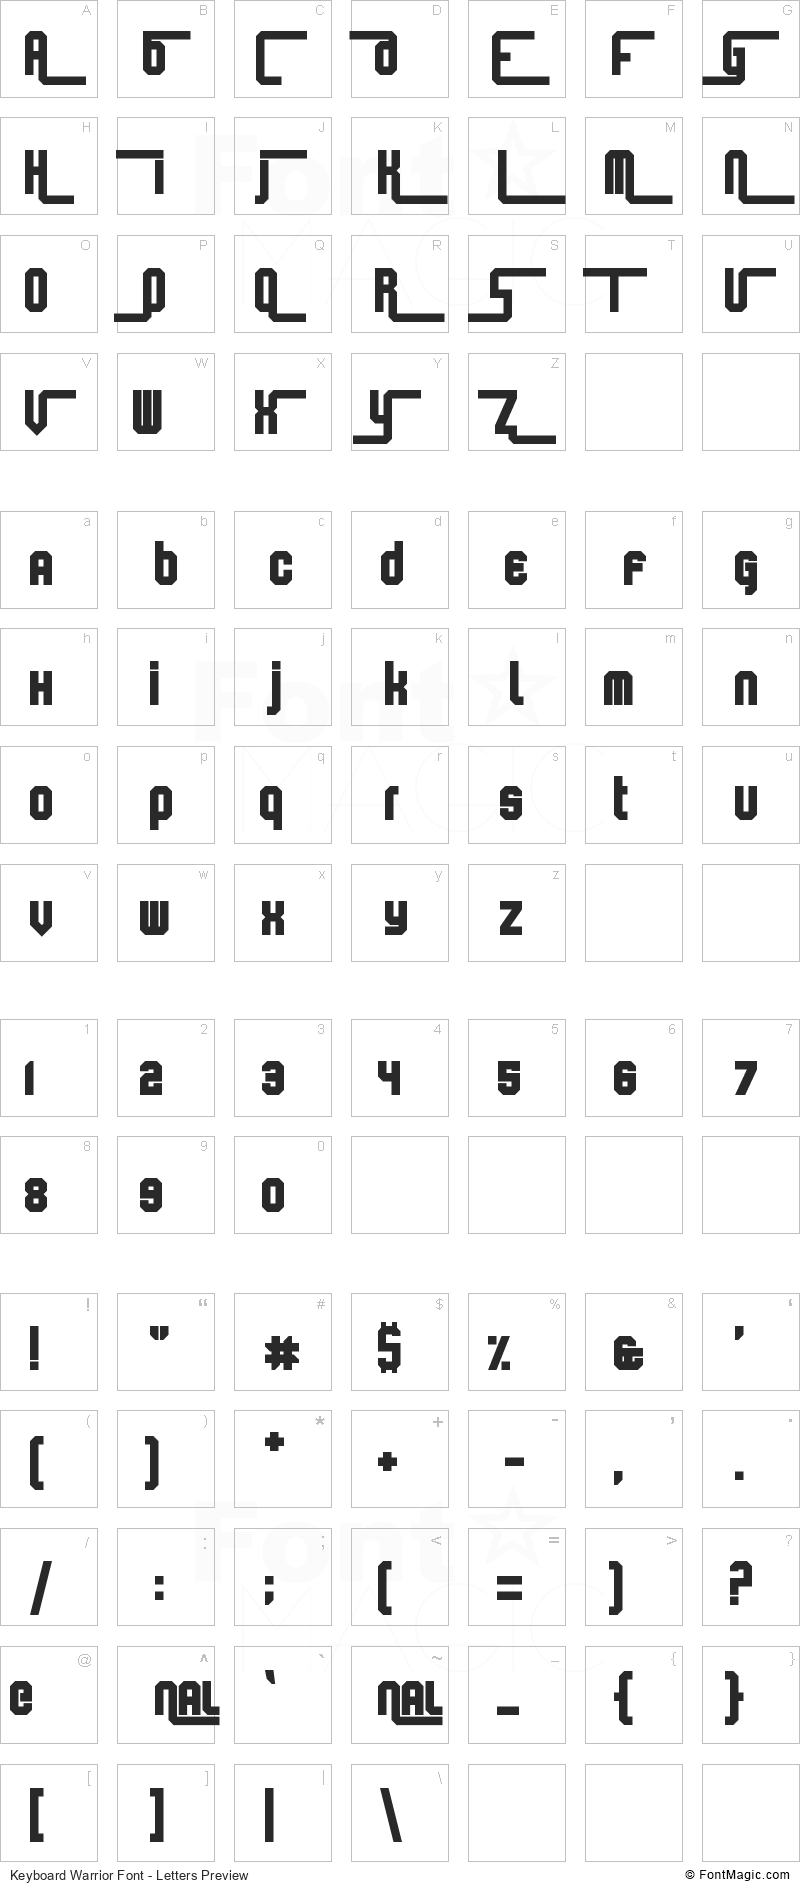 Keyboard Warrior Font - All Latters Preview Chart